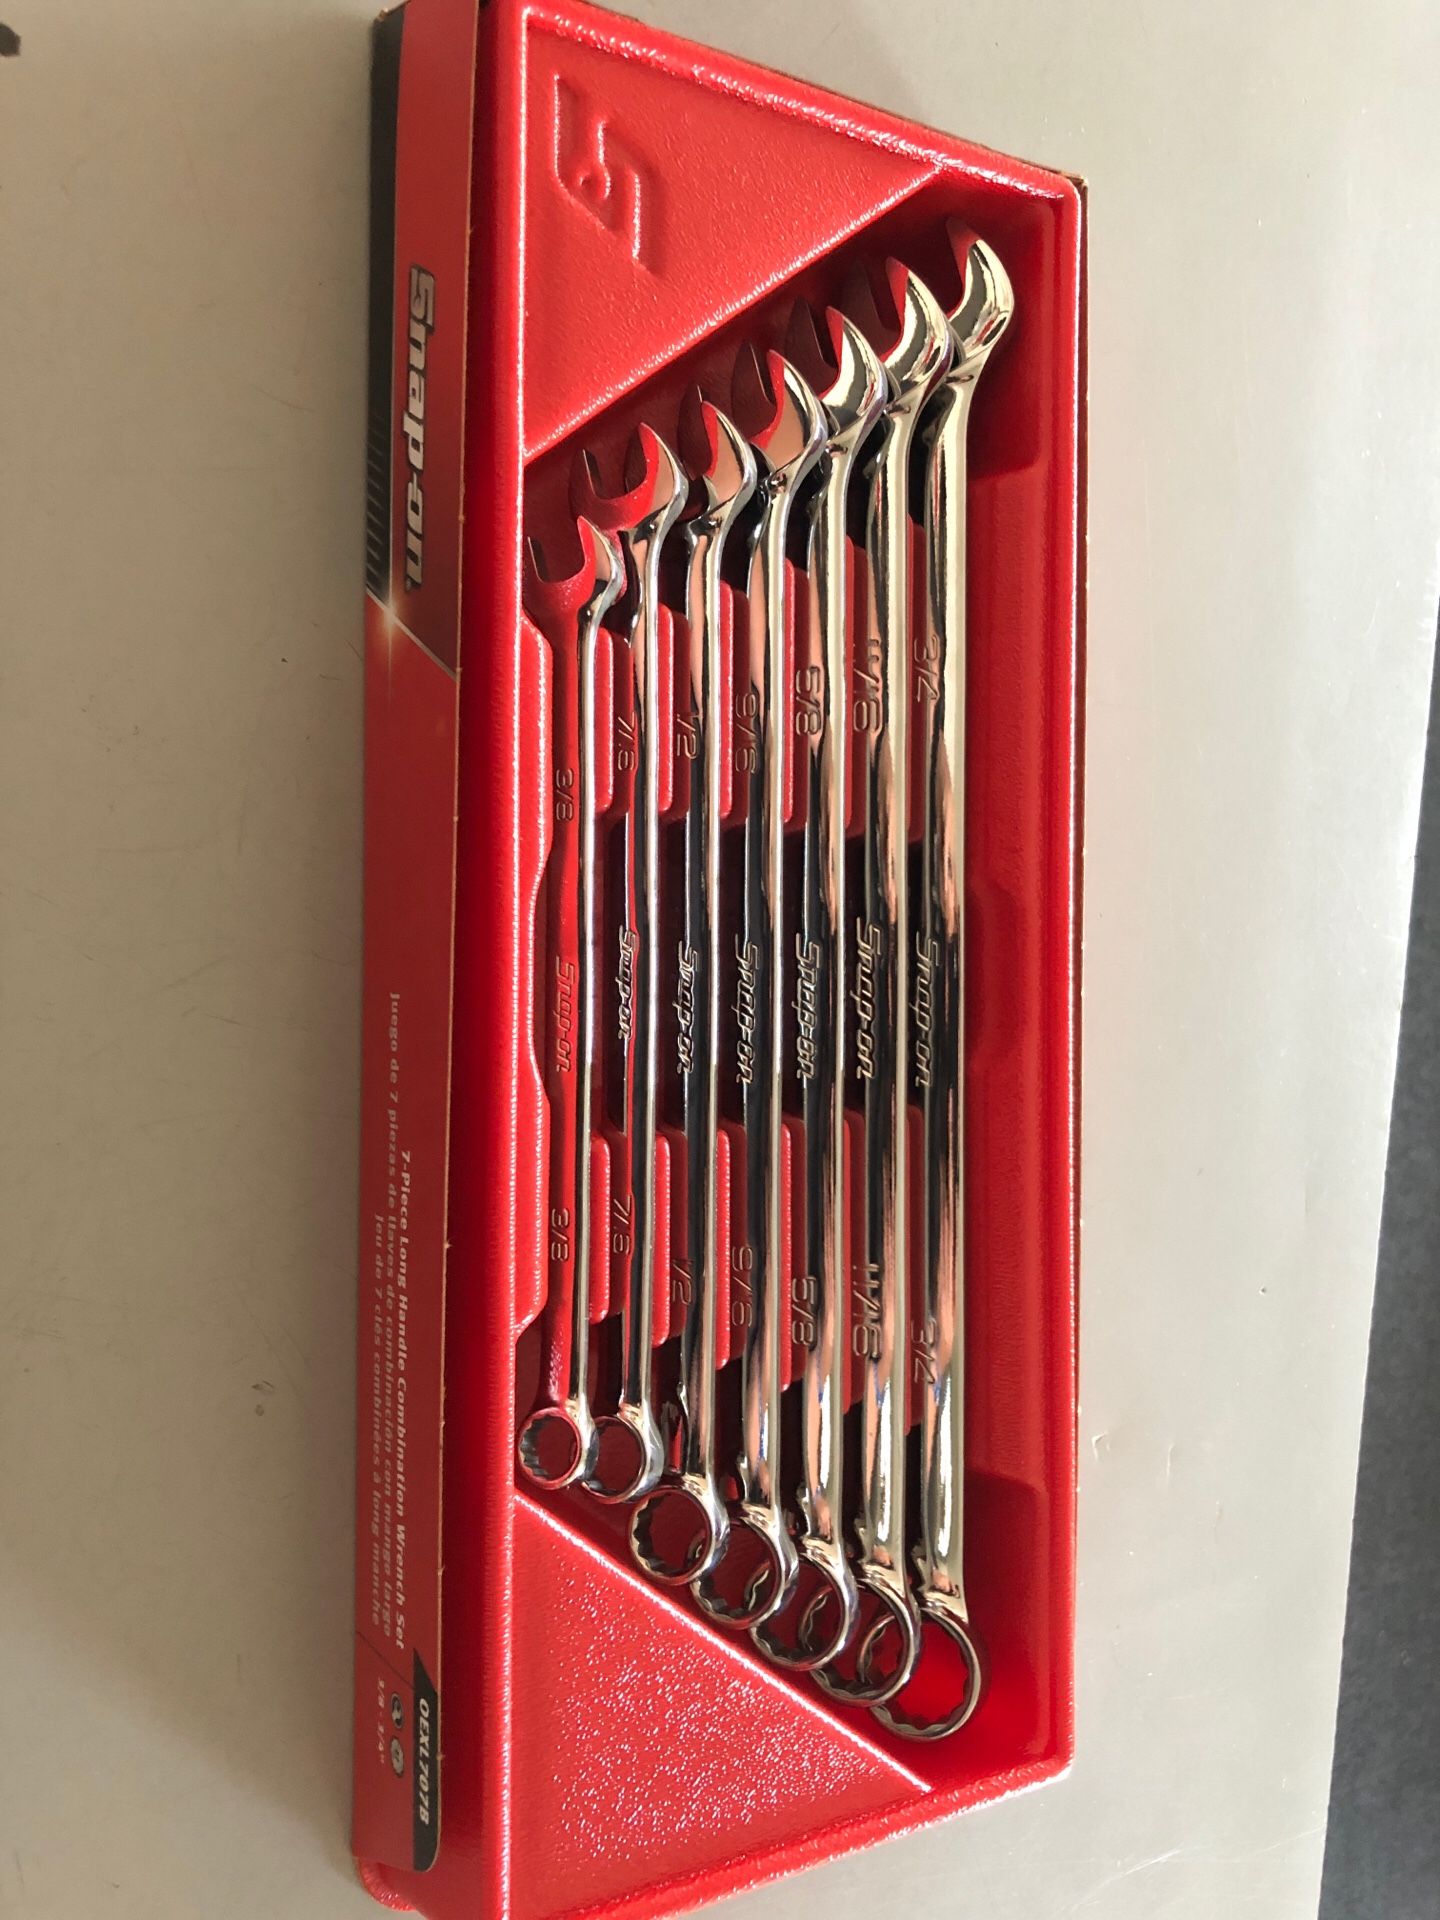 Snap on tools